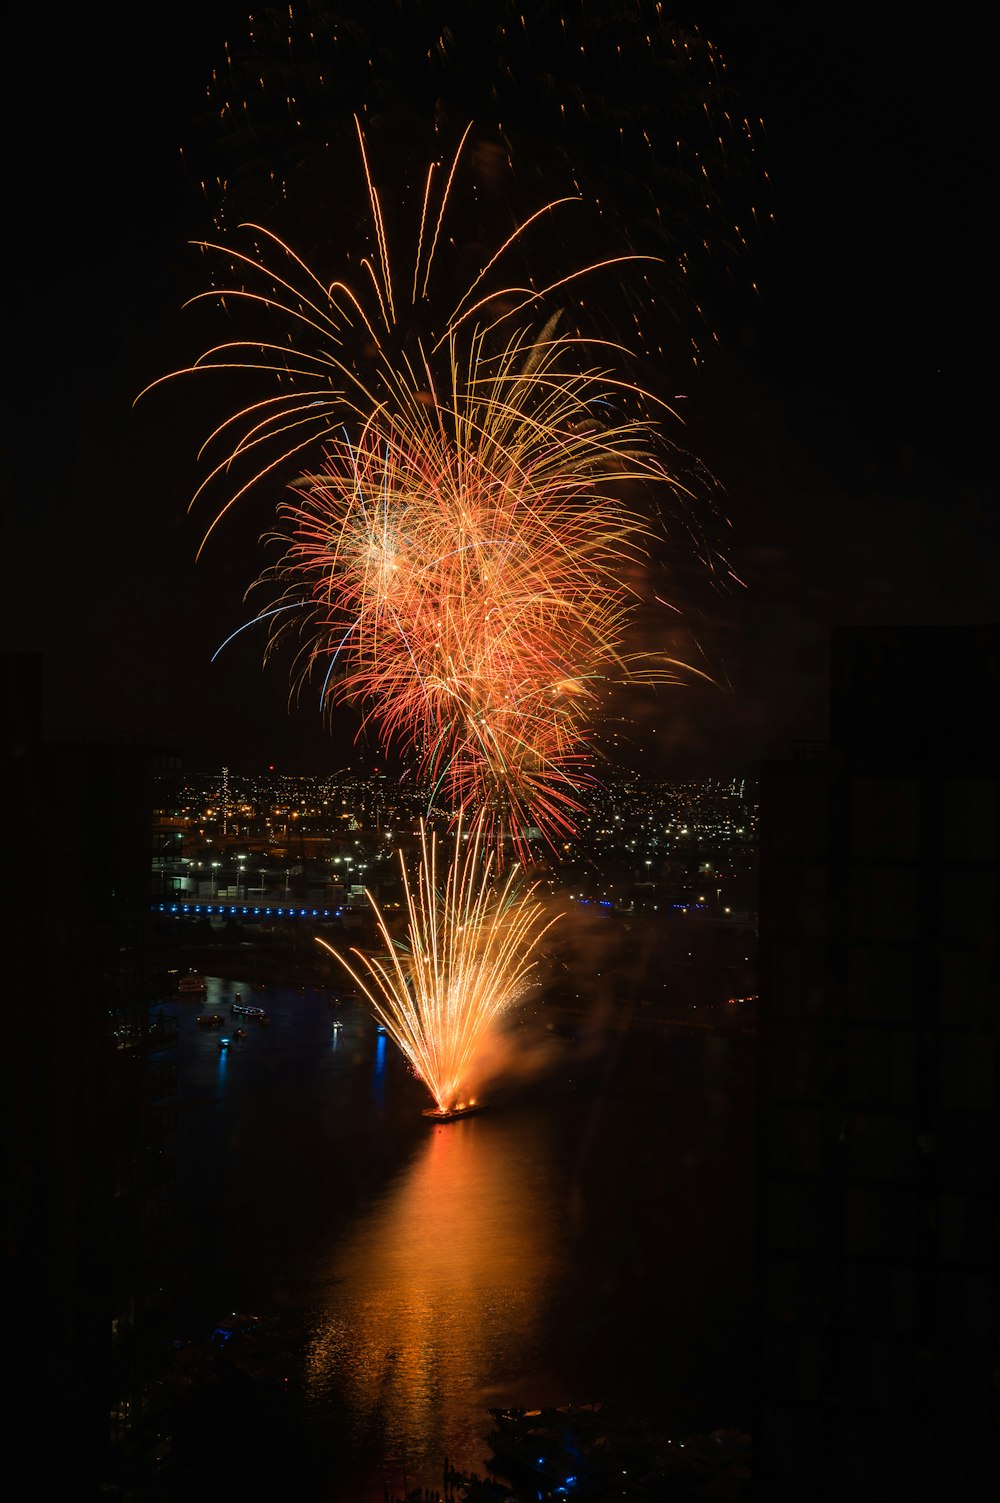 a firework display over a city at night